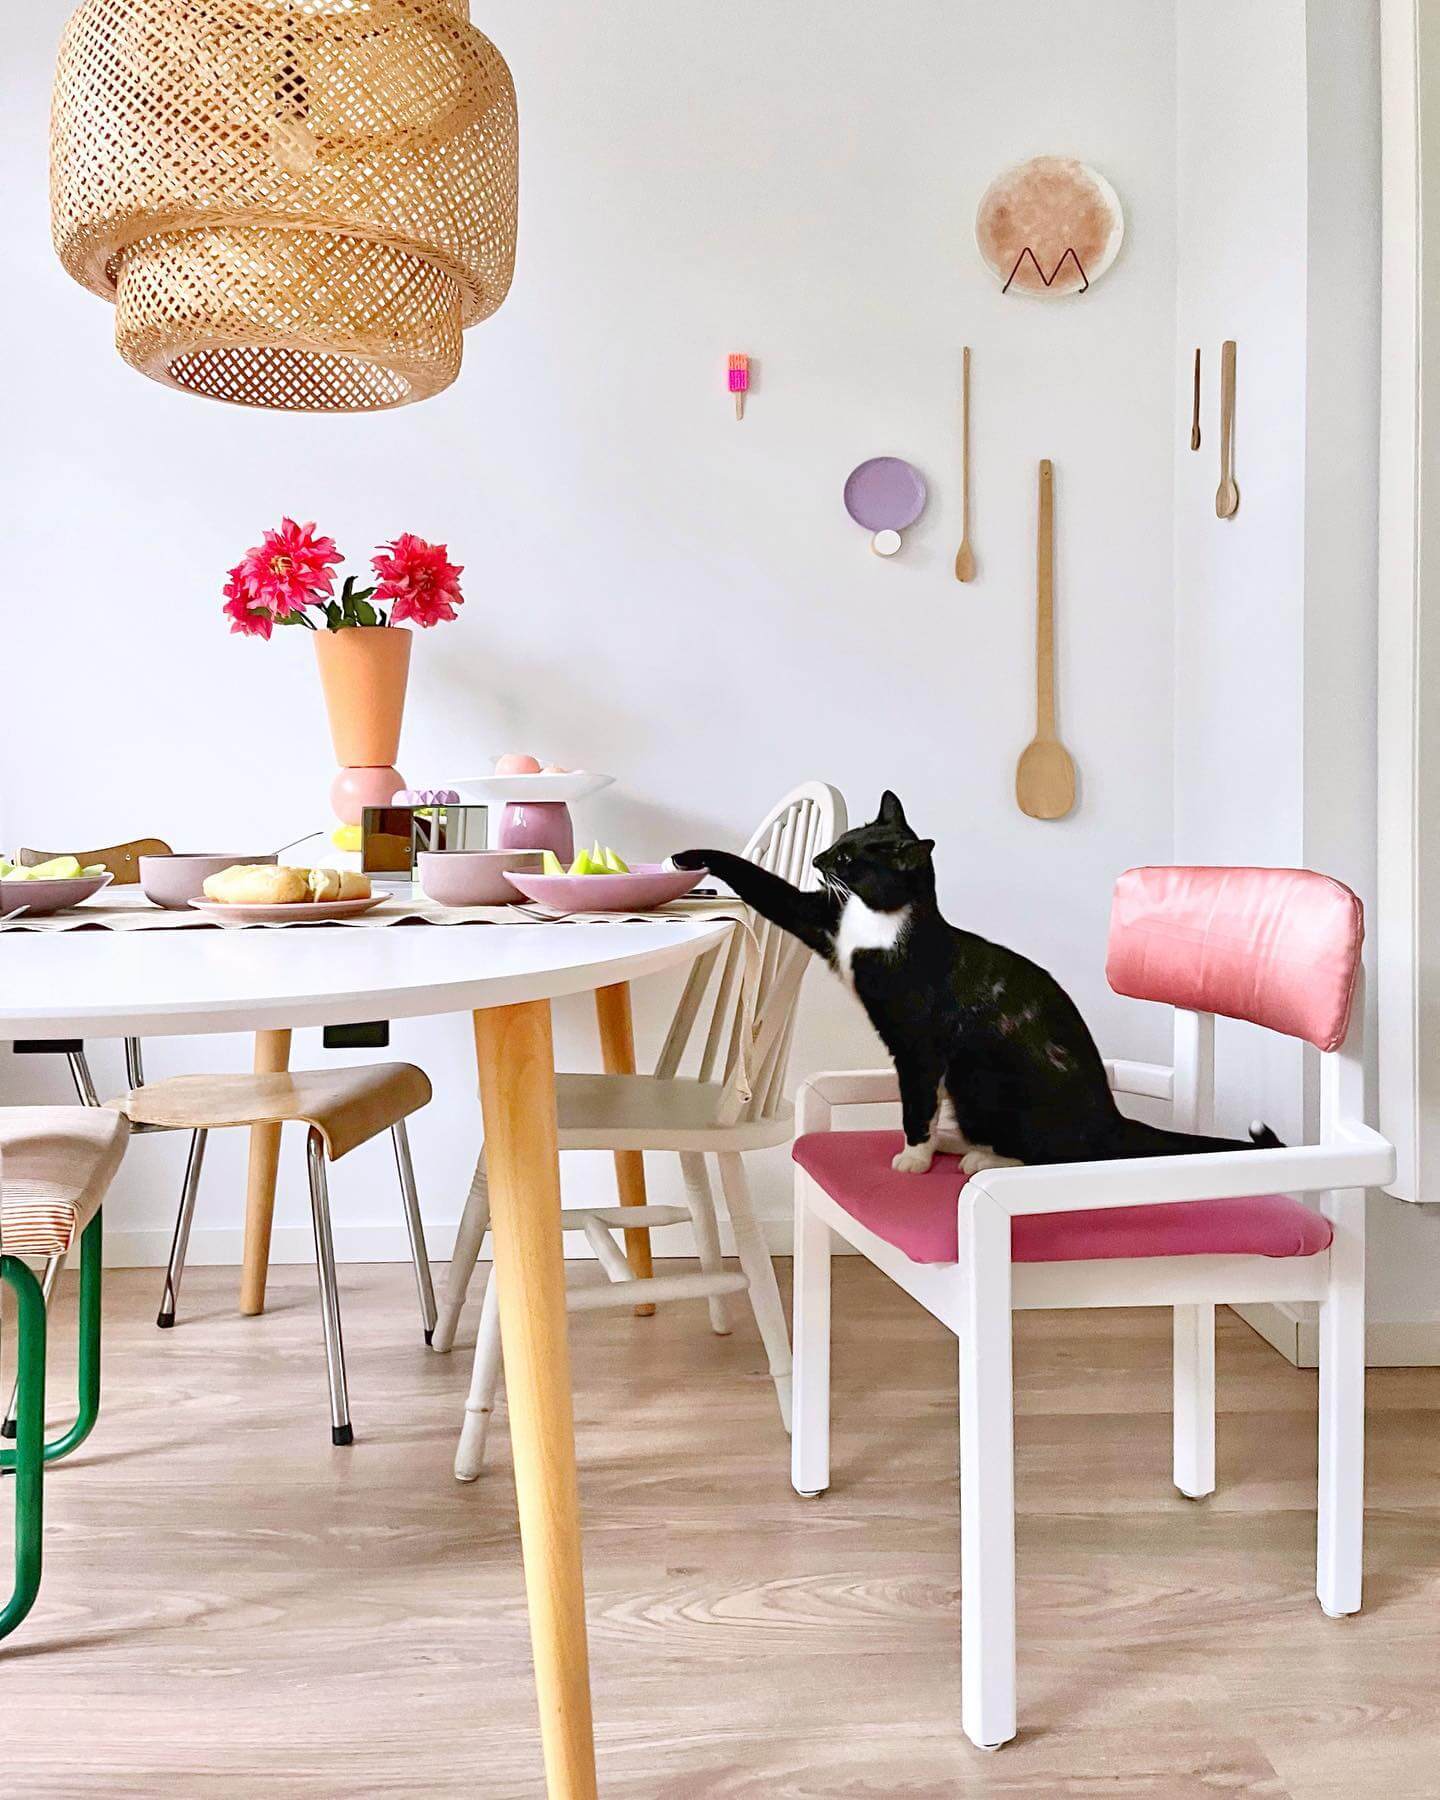 happy hildy home - pastel home with cat